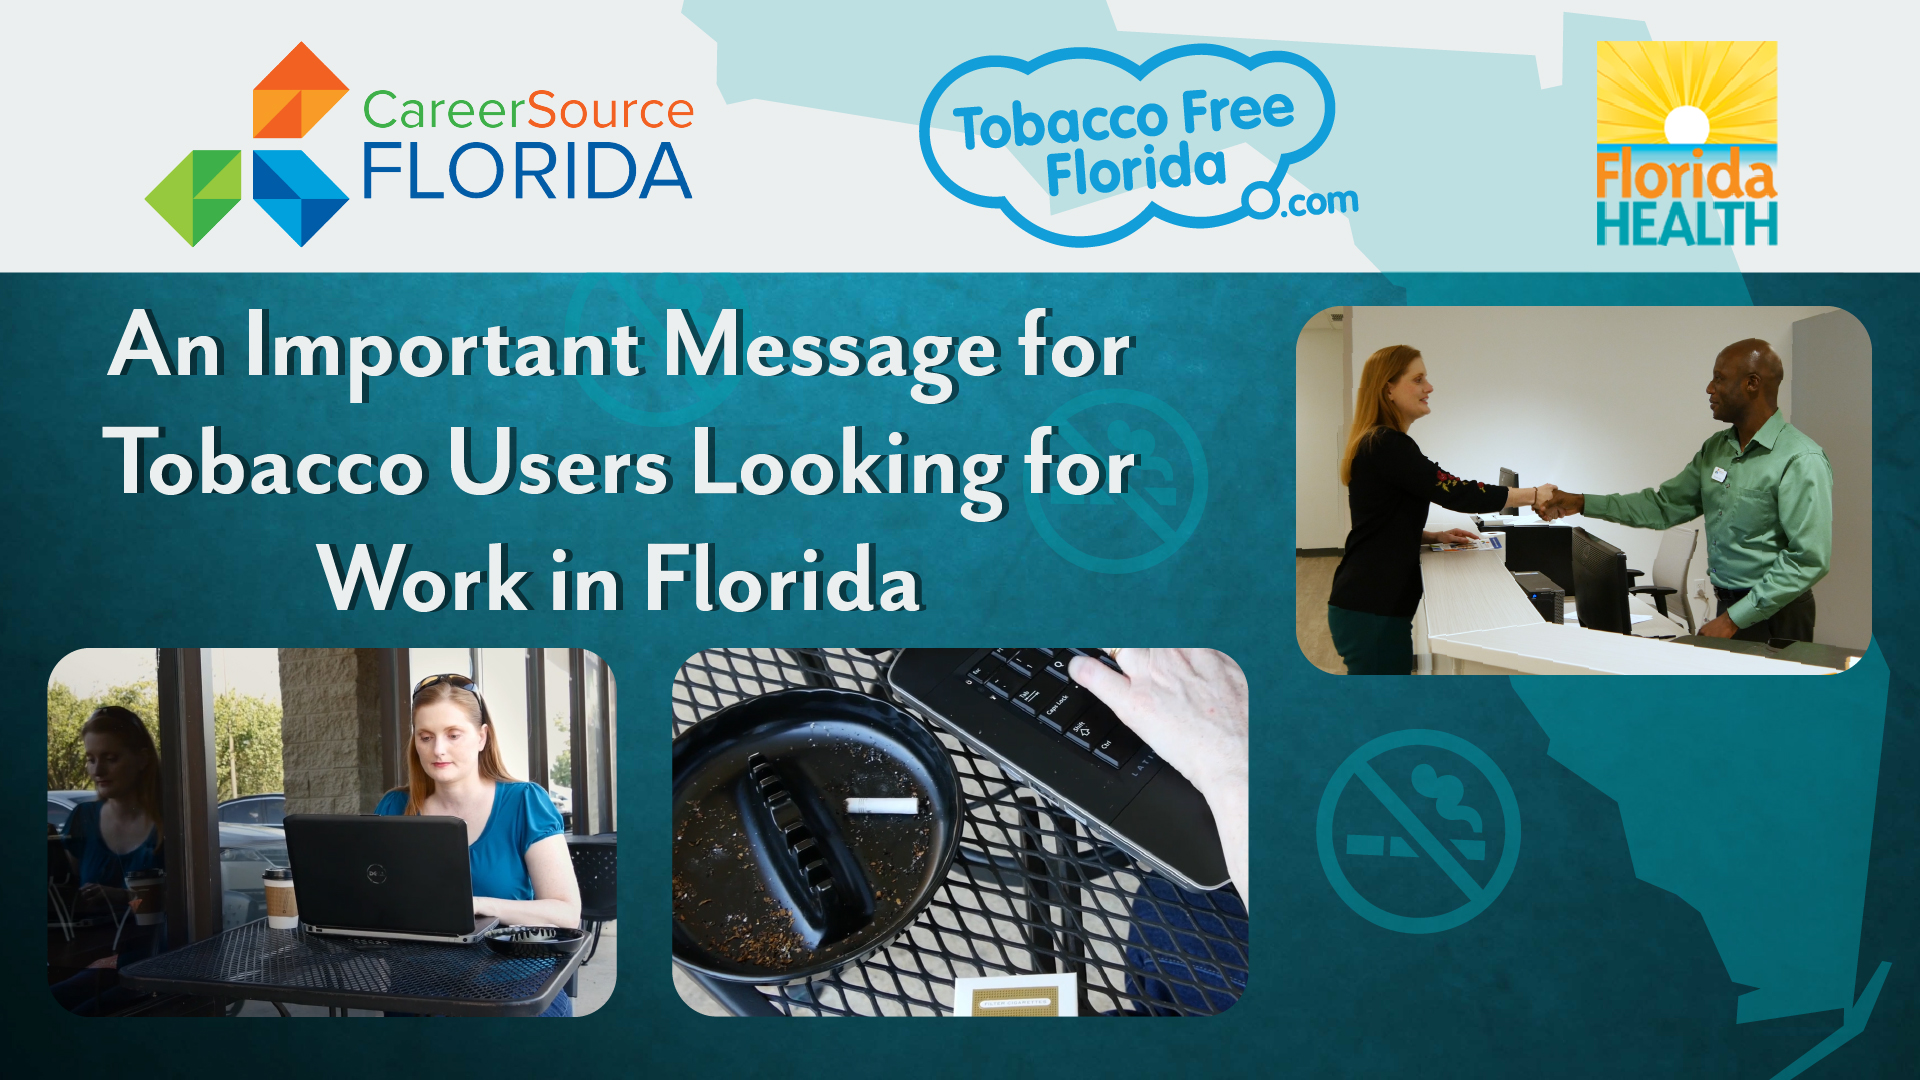 the Message for Tobacco Users in Florida toolkit does not have an image associated with it, a blank white image is a default place holder.